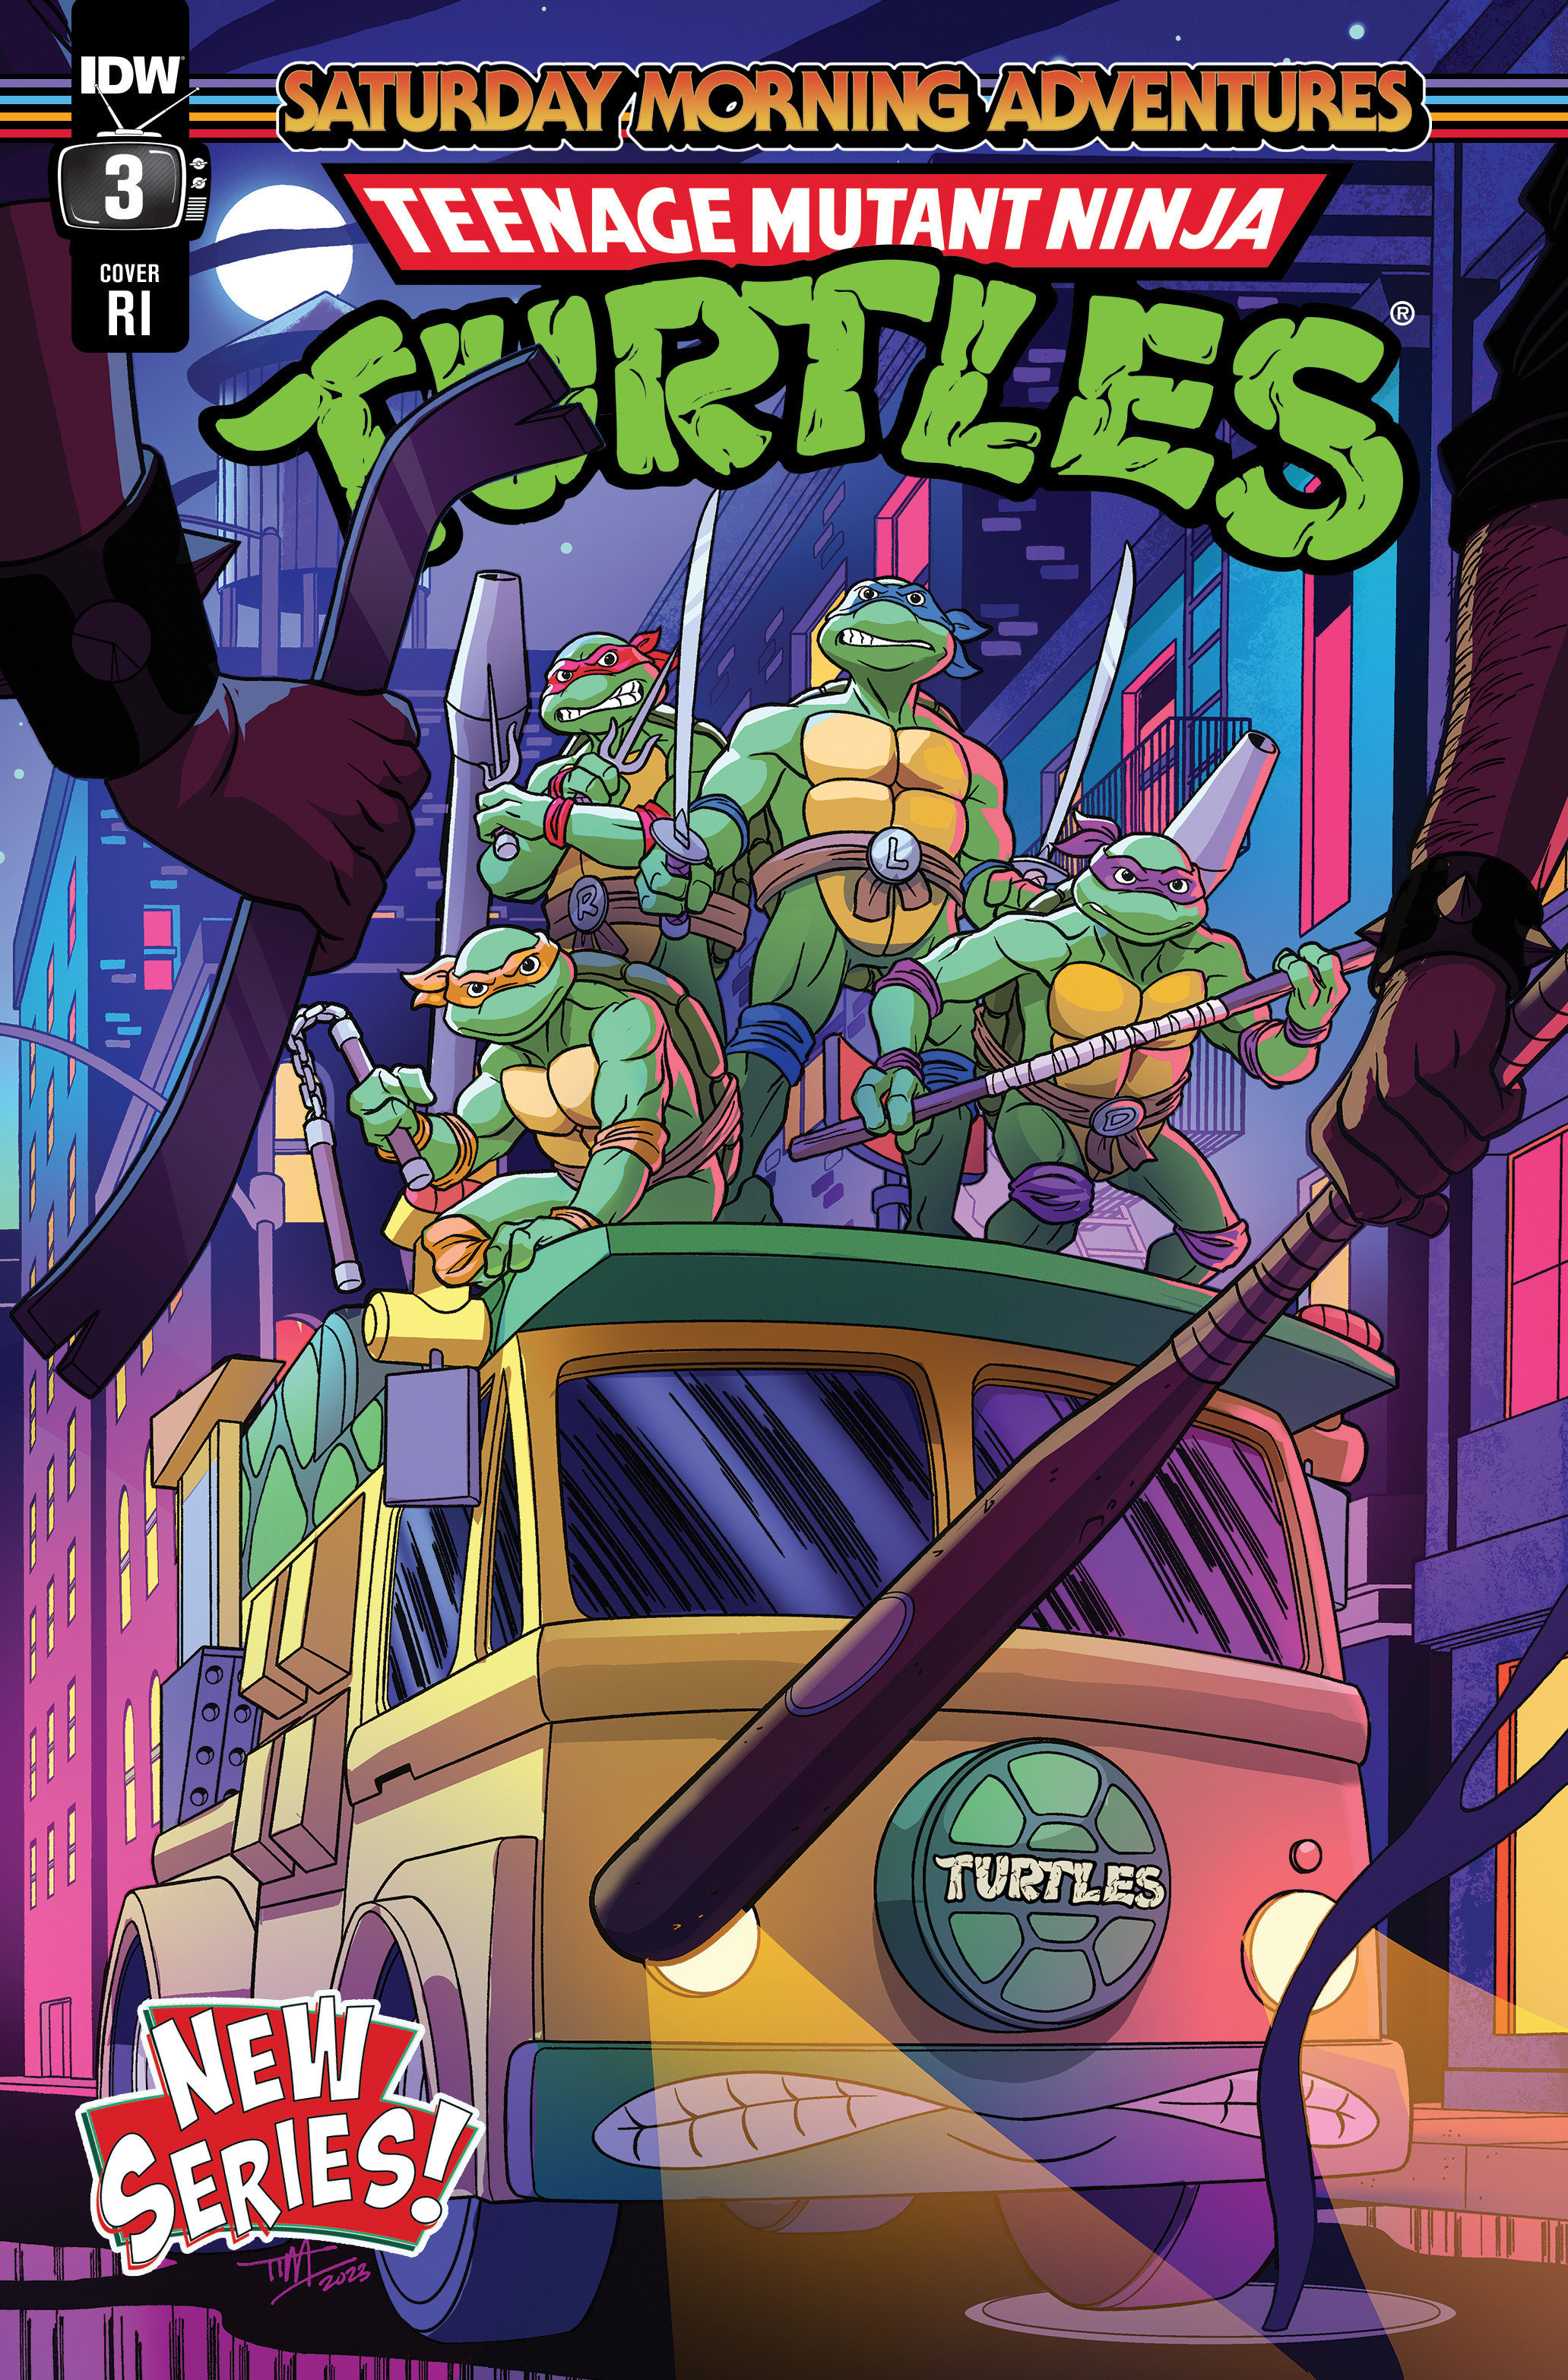 Teenage Mutant Ninja Turtles Saturday Morning Adventures Continued! #3 Cover D 1 for 10 Incentive Levins